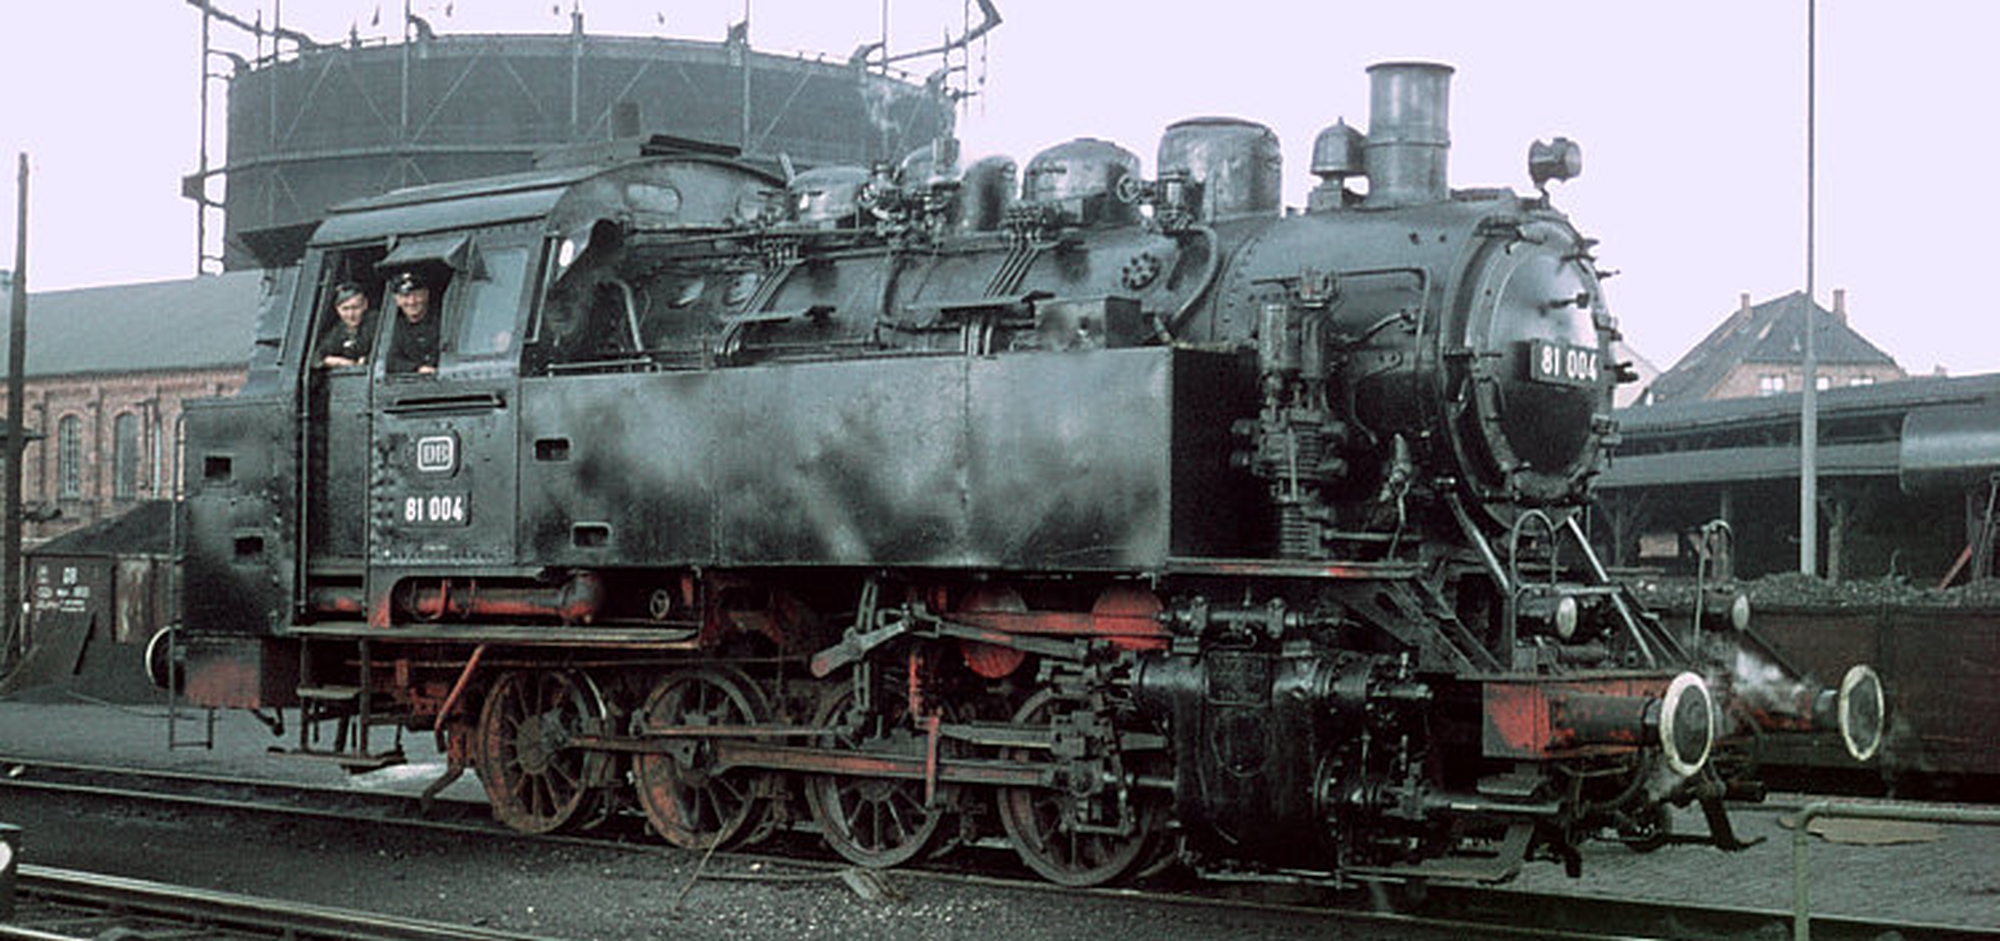 81 004 in August 1961